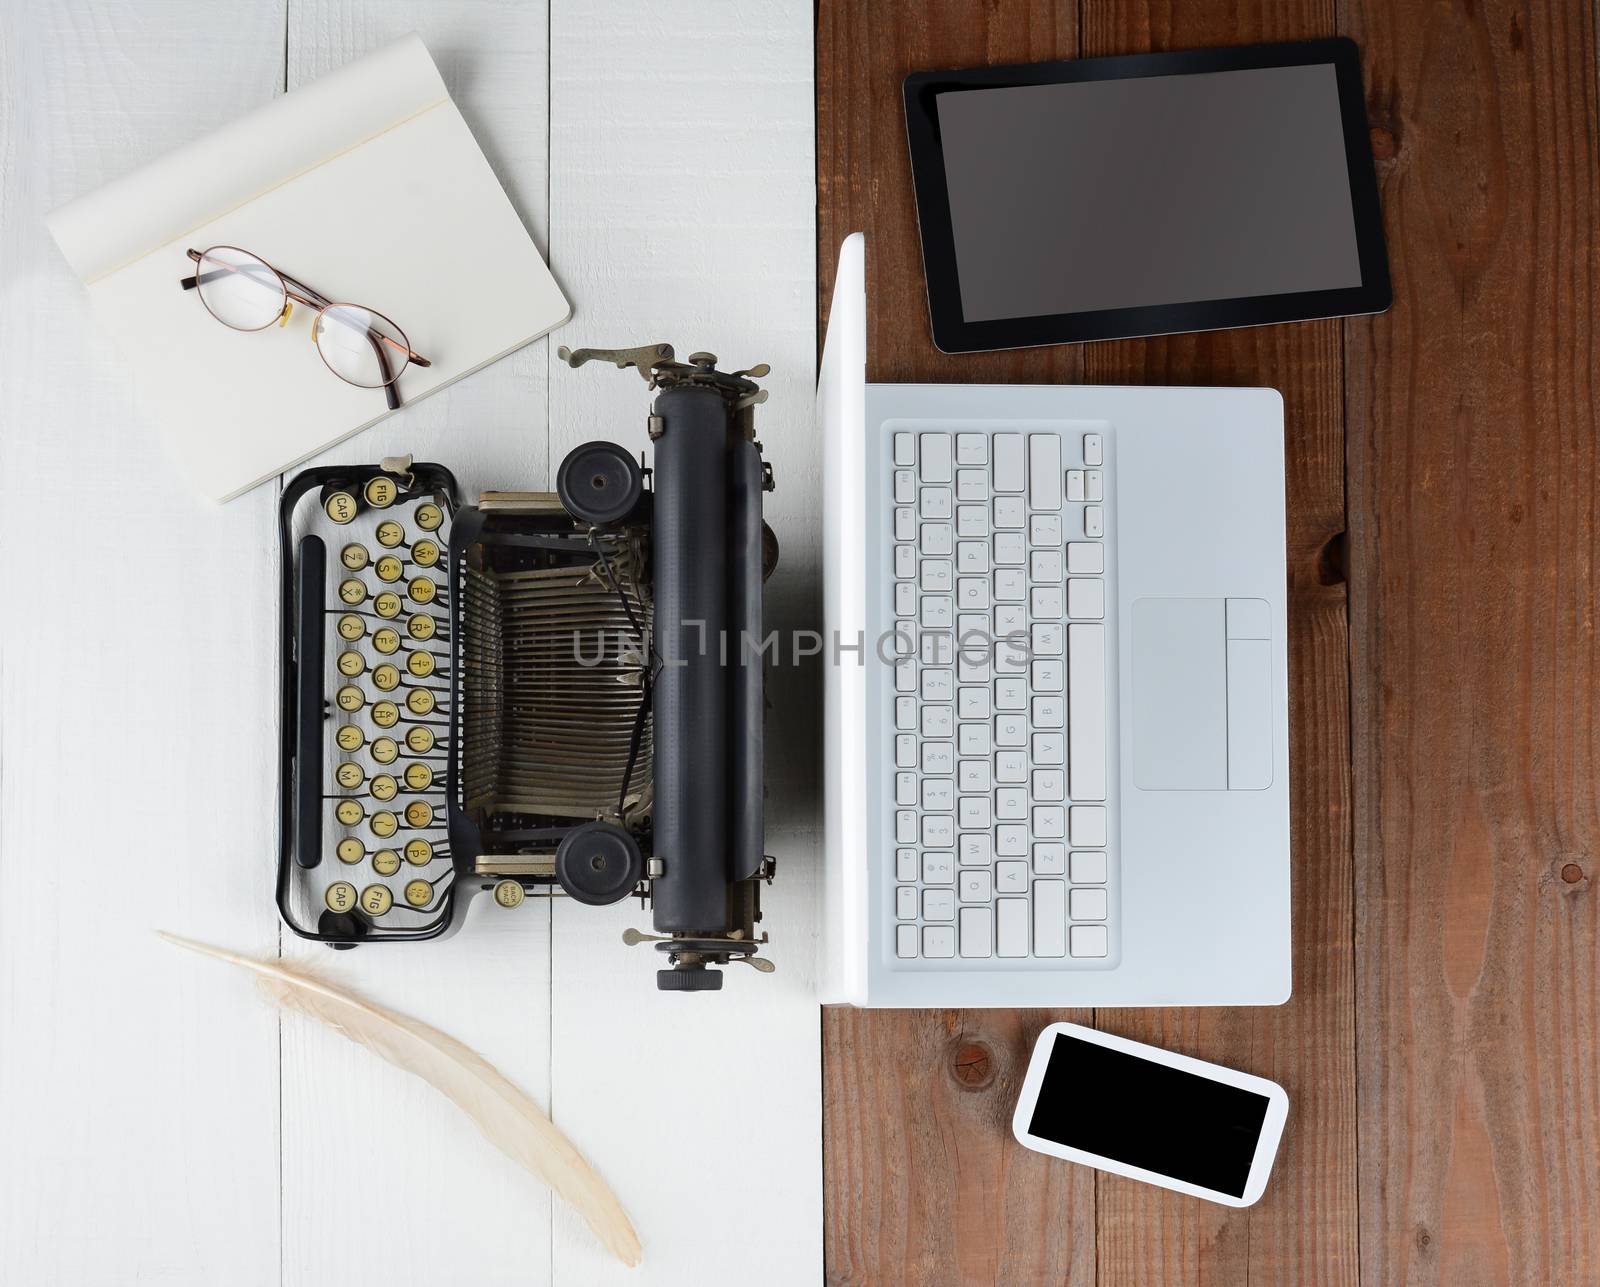 Overhead shot of and old fashioned desk with typewriter and quill pen back-to-back with a modern set up with laptop computer, tablet and cell phone, (Phone and Tablet created in Photoshop - not real)